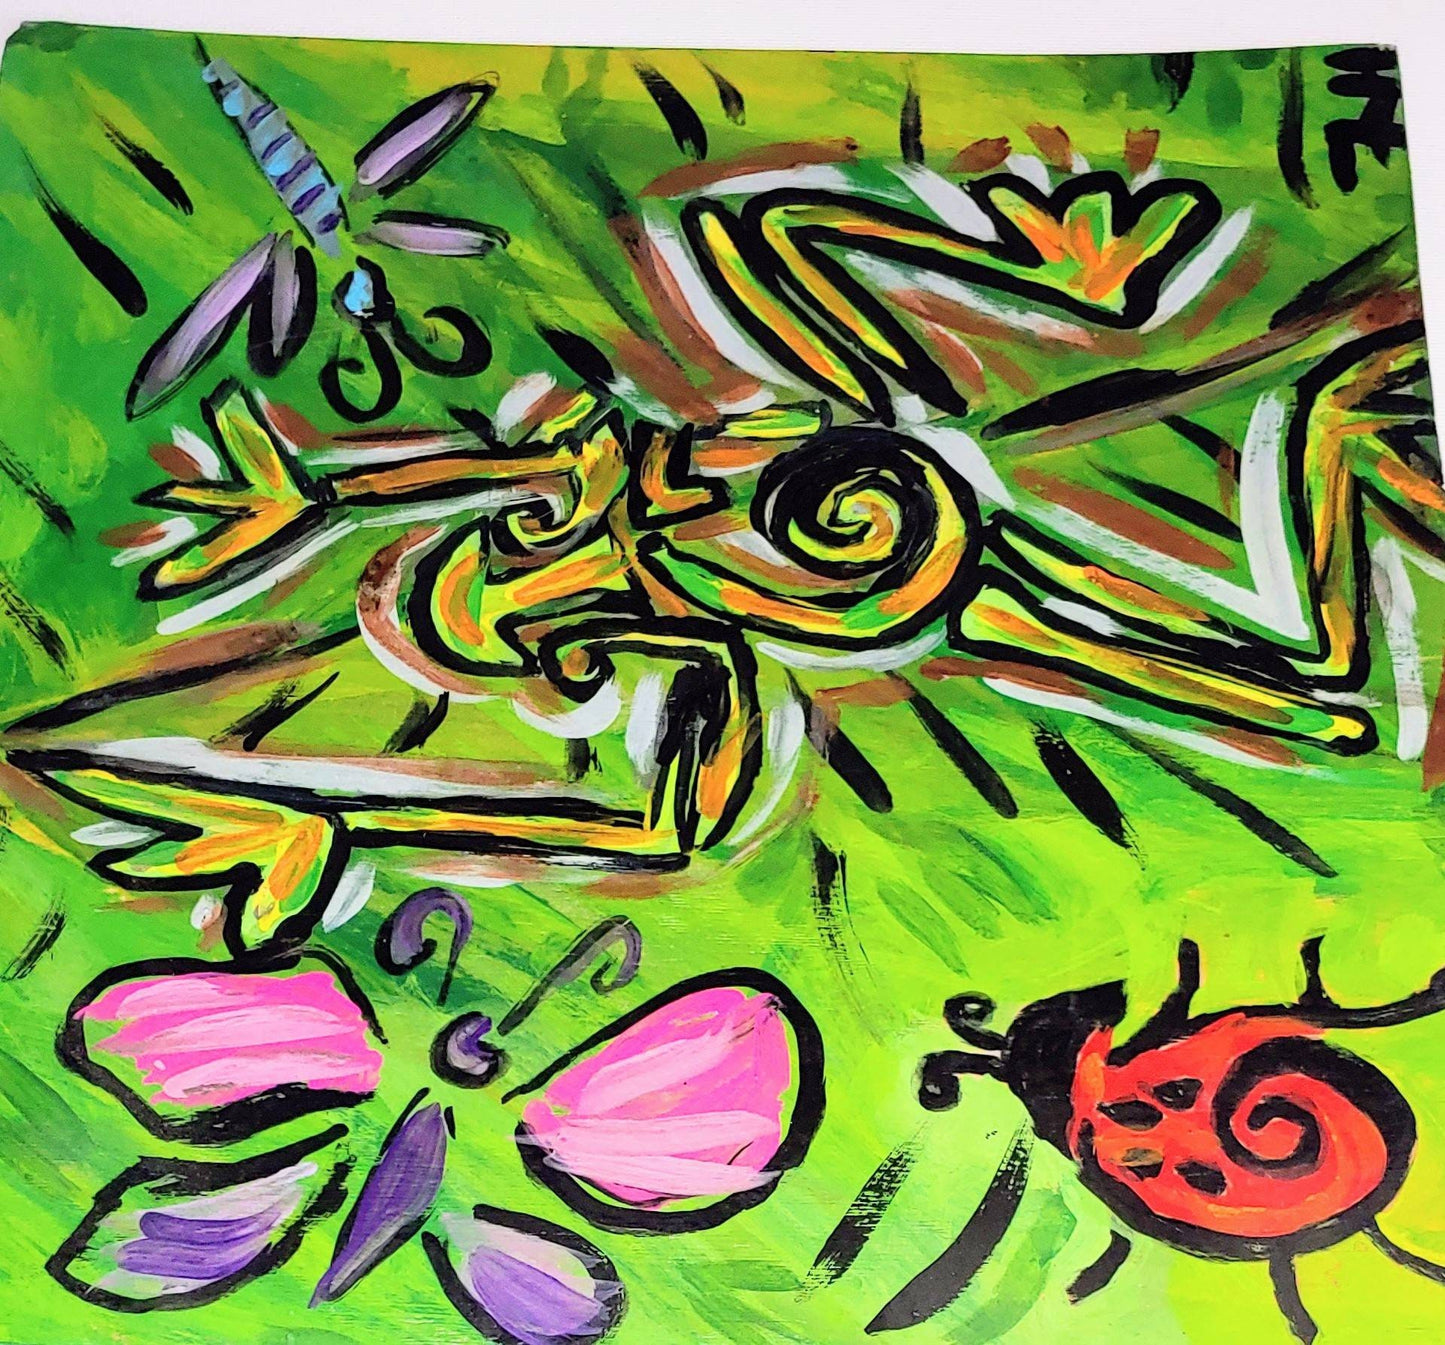 big sale  Was 40 now 15 dollars  geometric frog 12 x 12 inch painting on plywood